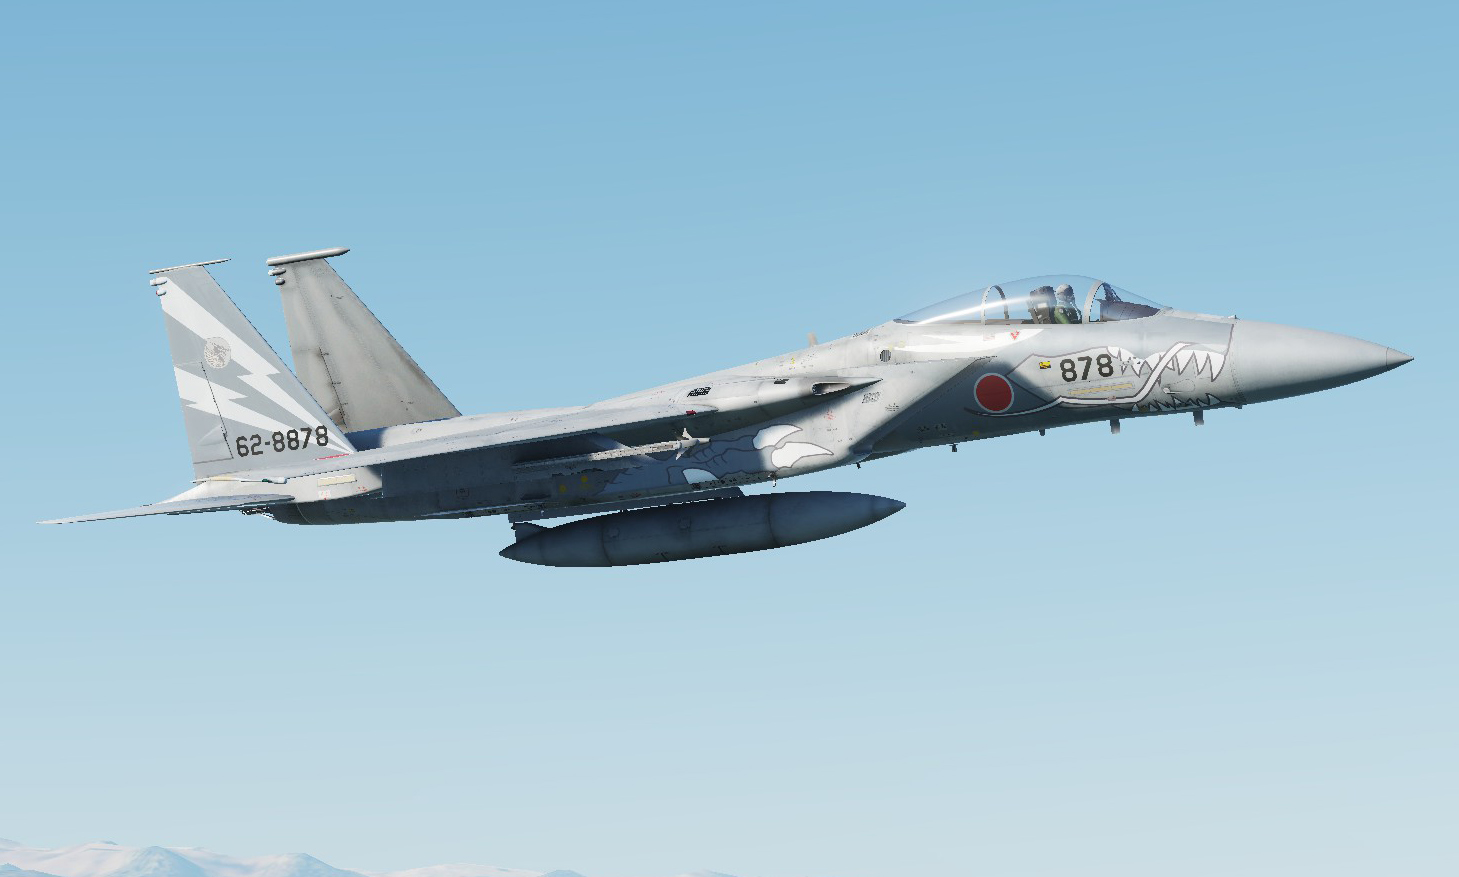 JASDF F-15J 303RD TFS 62-8878 2017 AIR SHOW SPECIAL PAINTING